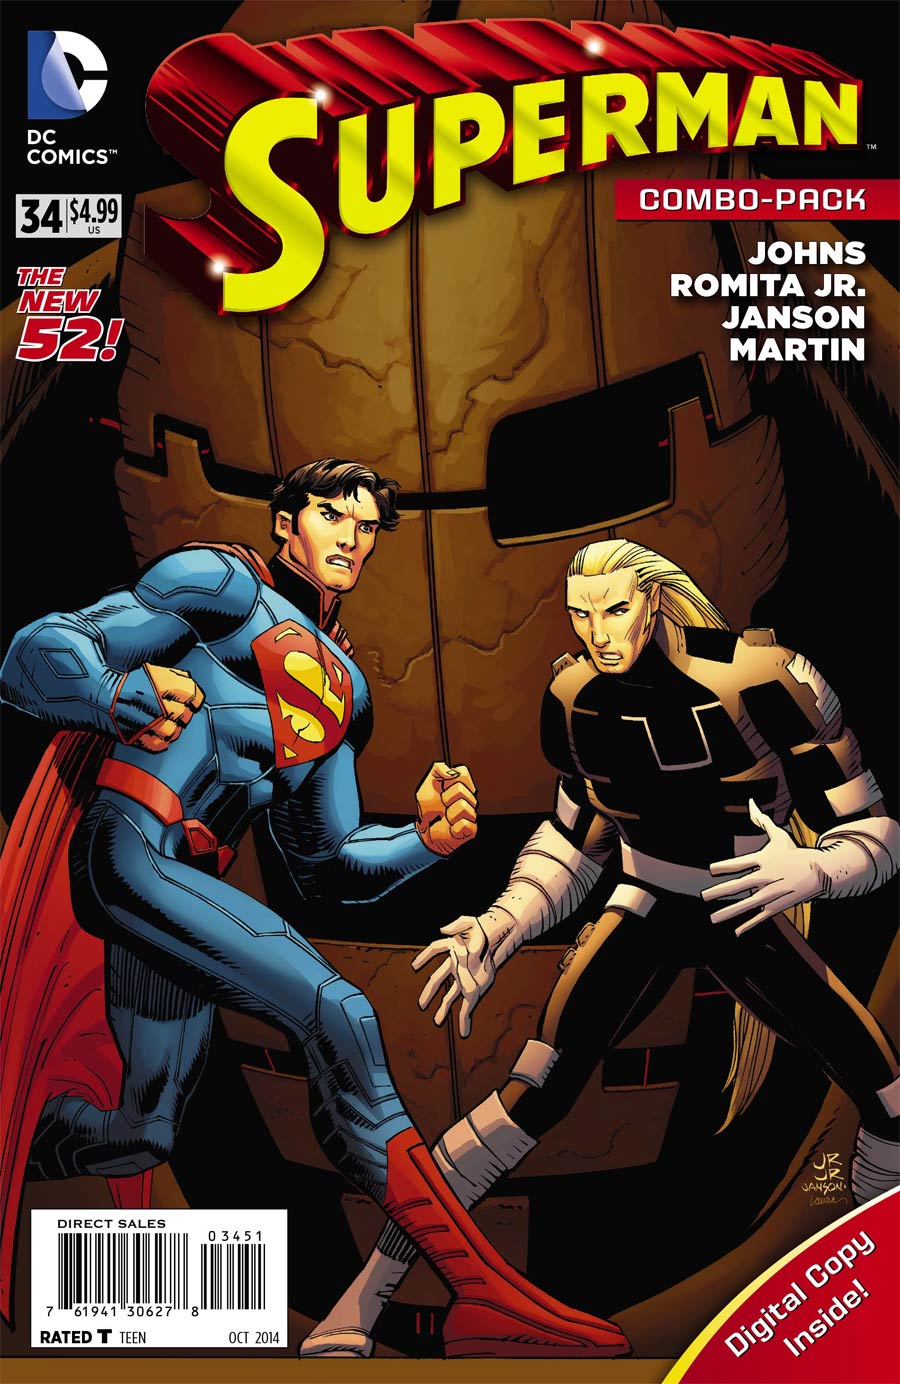 Superman Vol 4 #34 Cover D Combo Pack Without Polybag